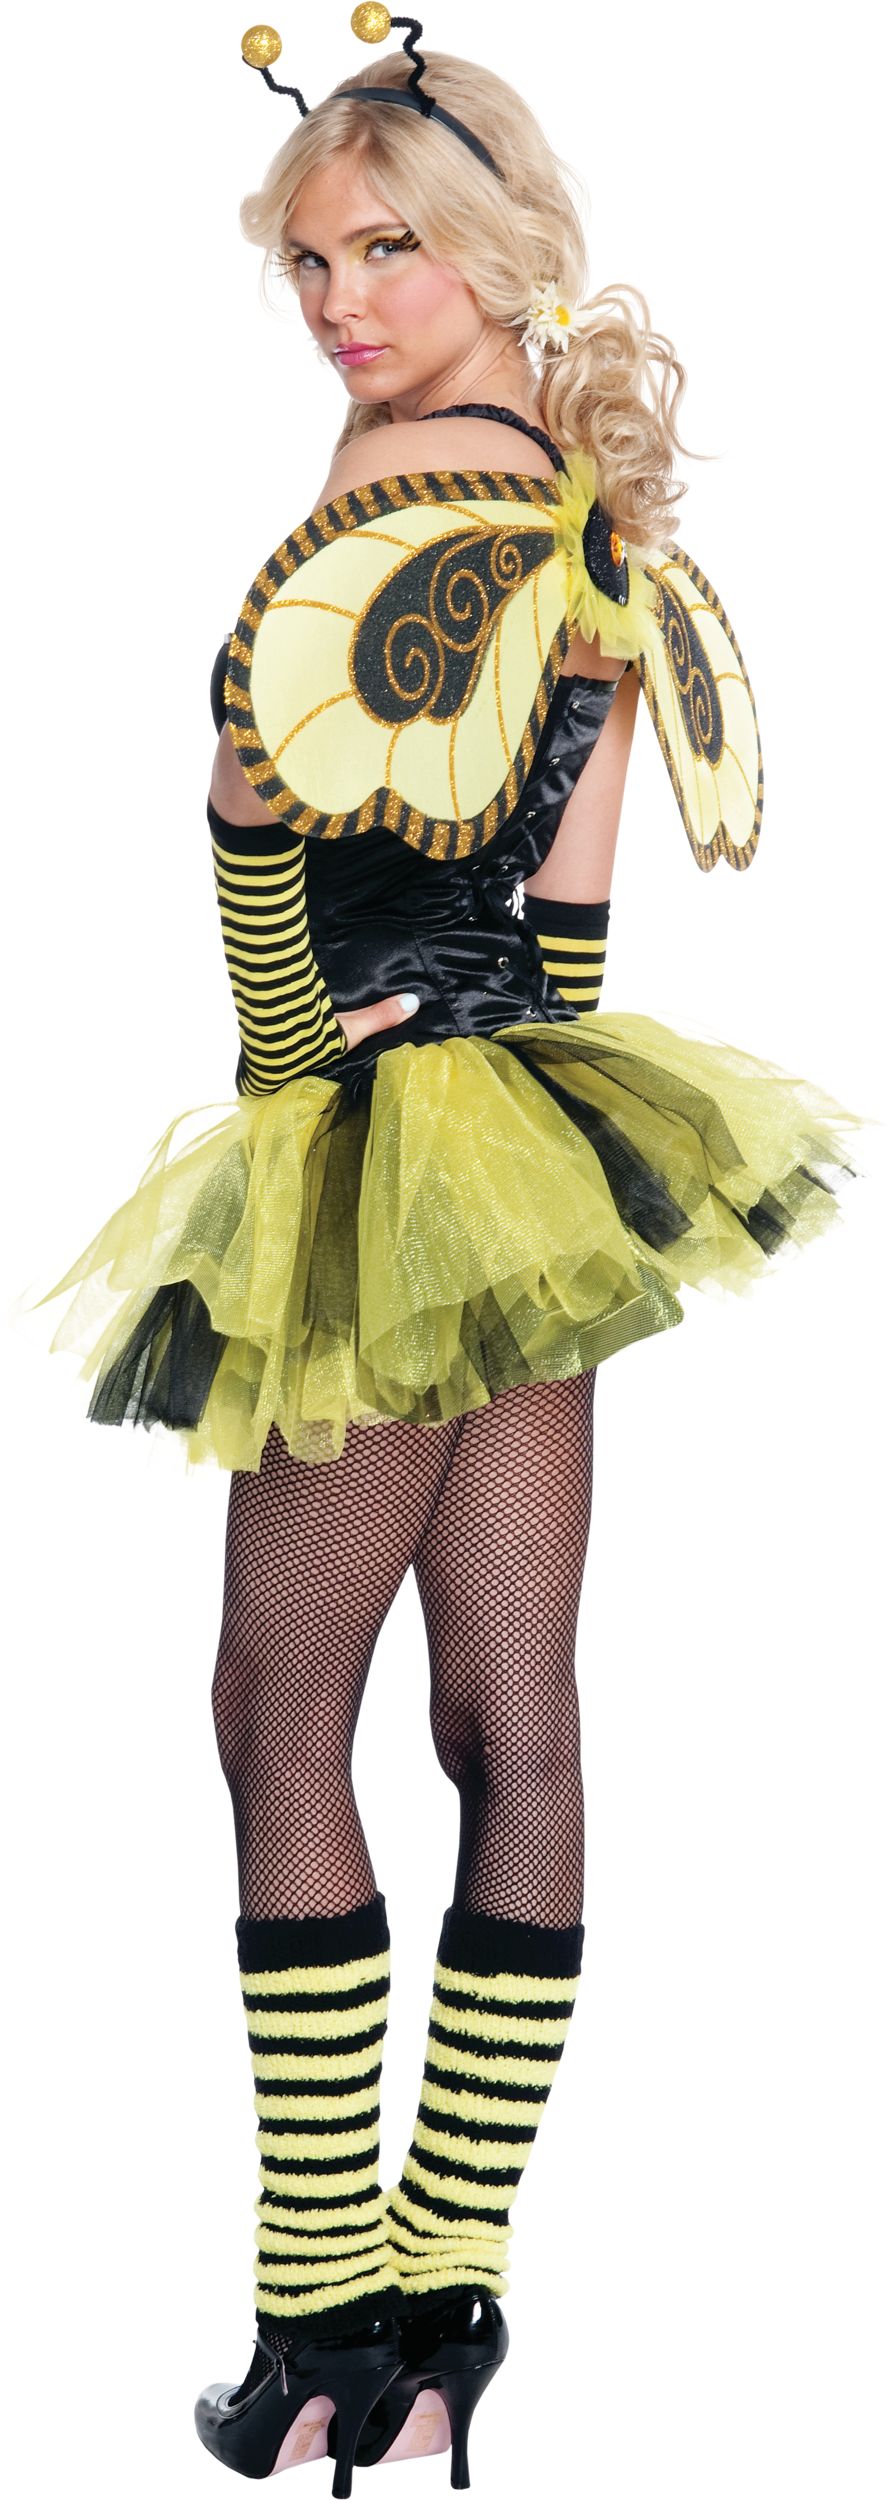 Bumblebee Footless Tights - Child Standard Size, Black/Yellow - 2